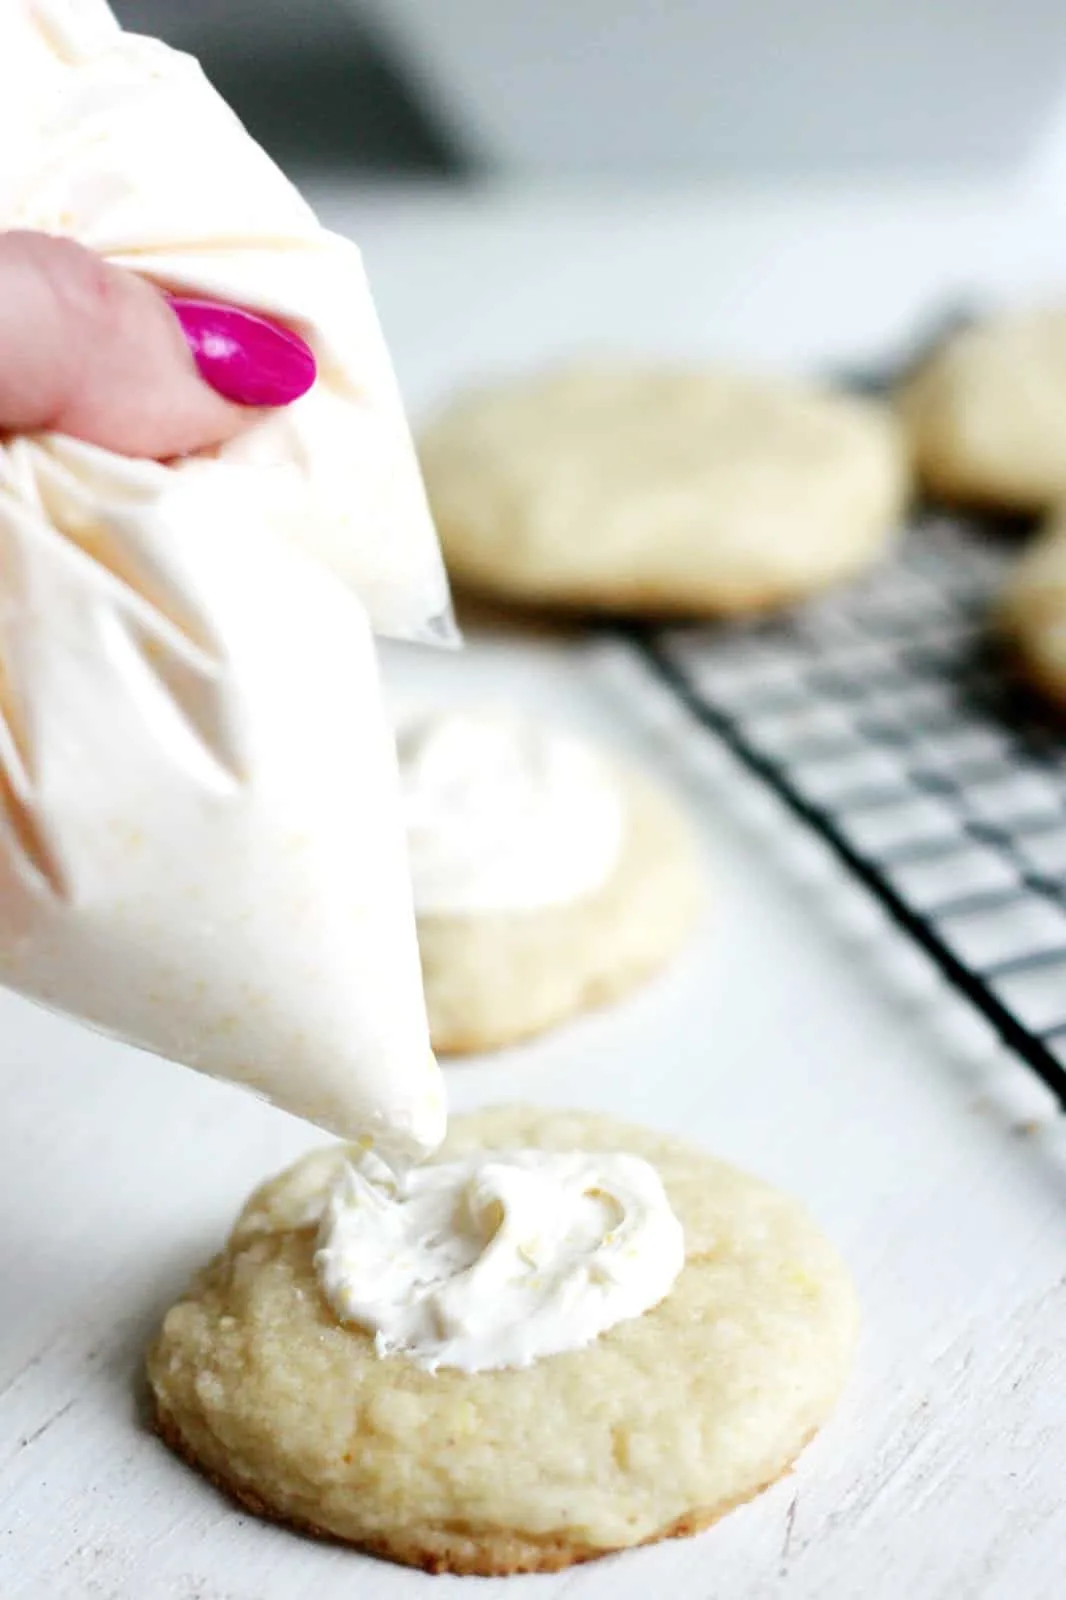 Spreading cream cheese icing on the top of a lemon cookie